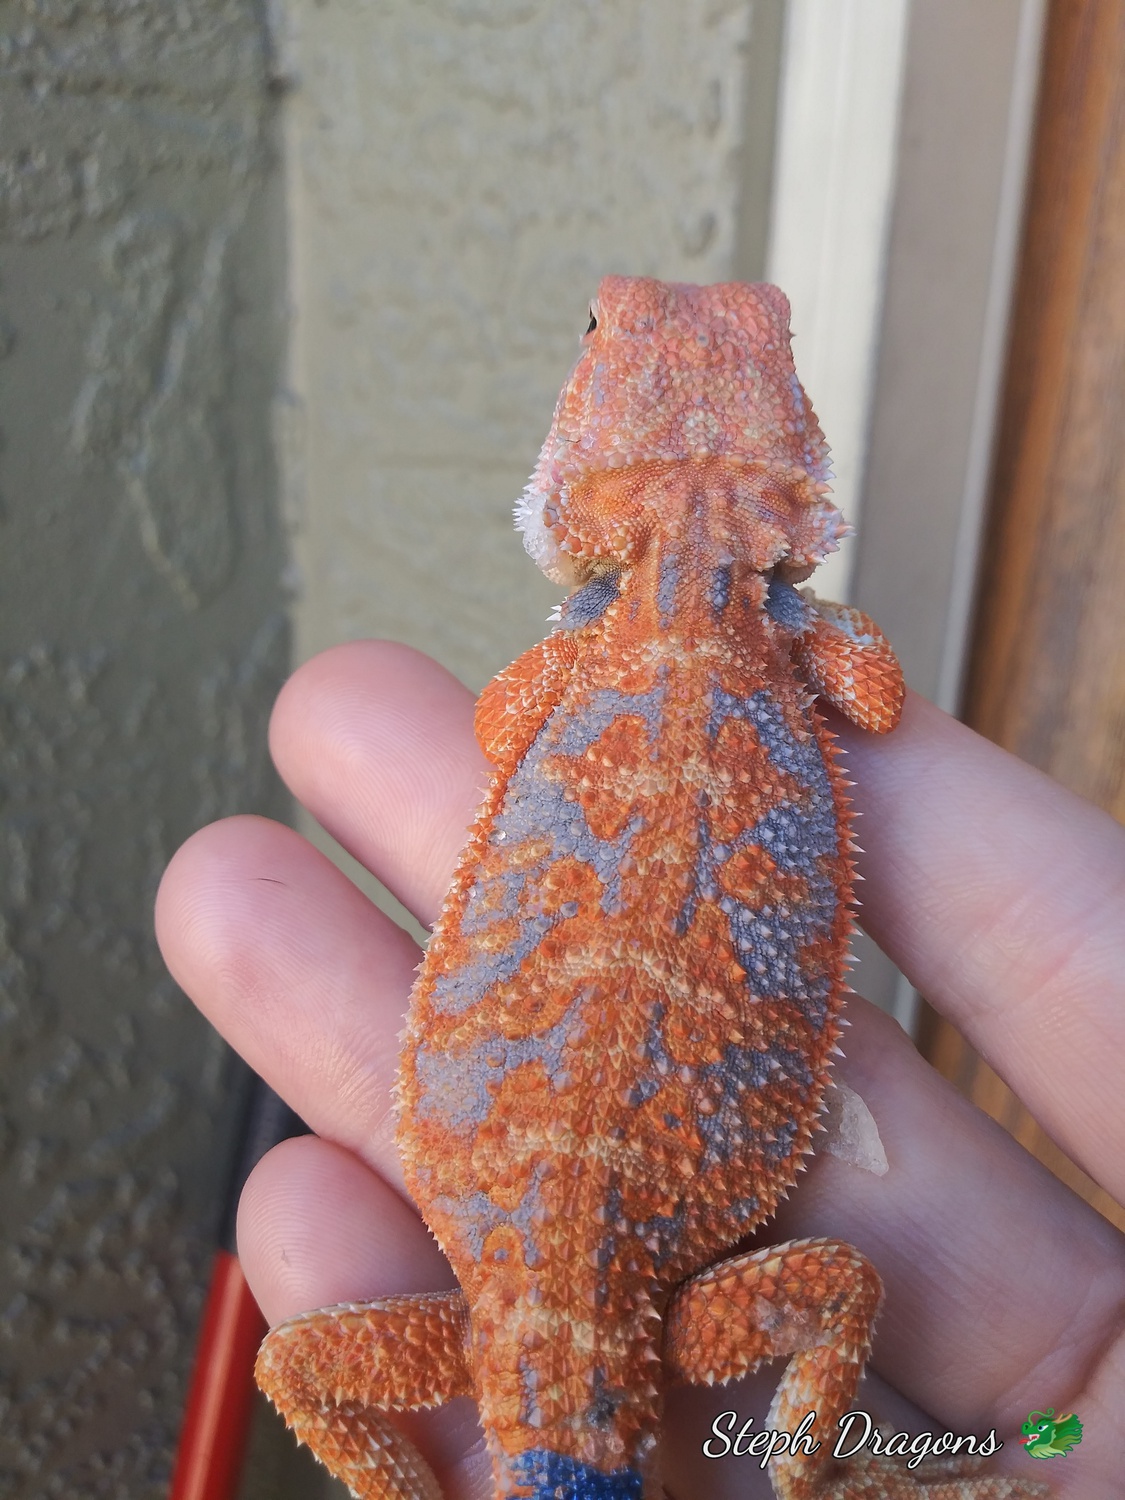 Red Blue Hypo Het Tran Male Central Bearded Dragon by Steph dragons